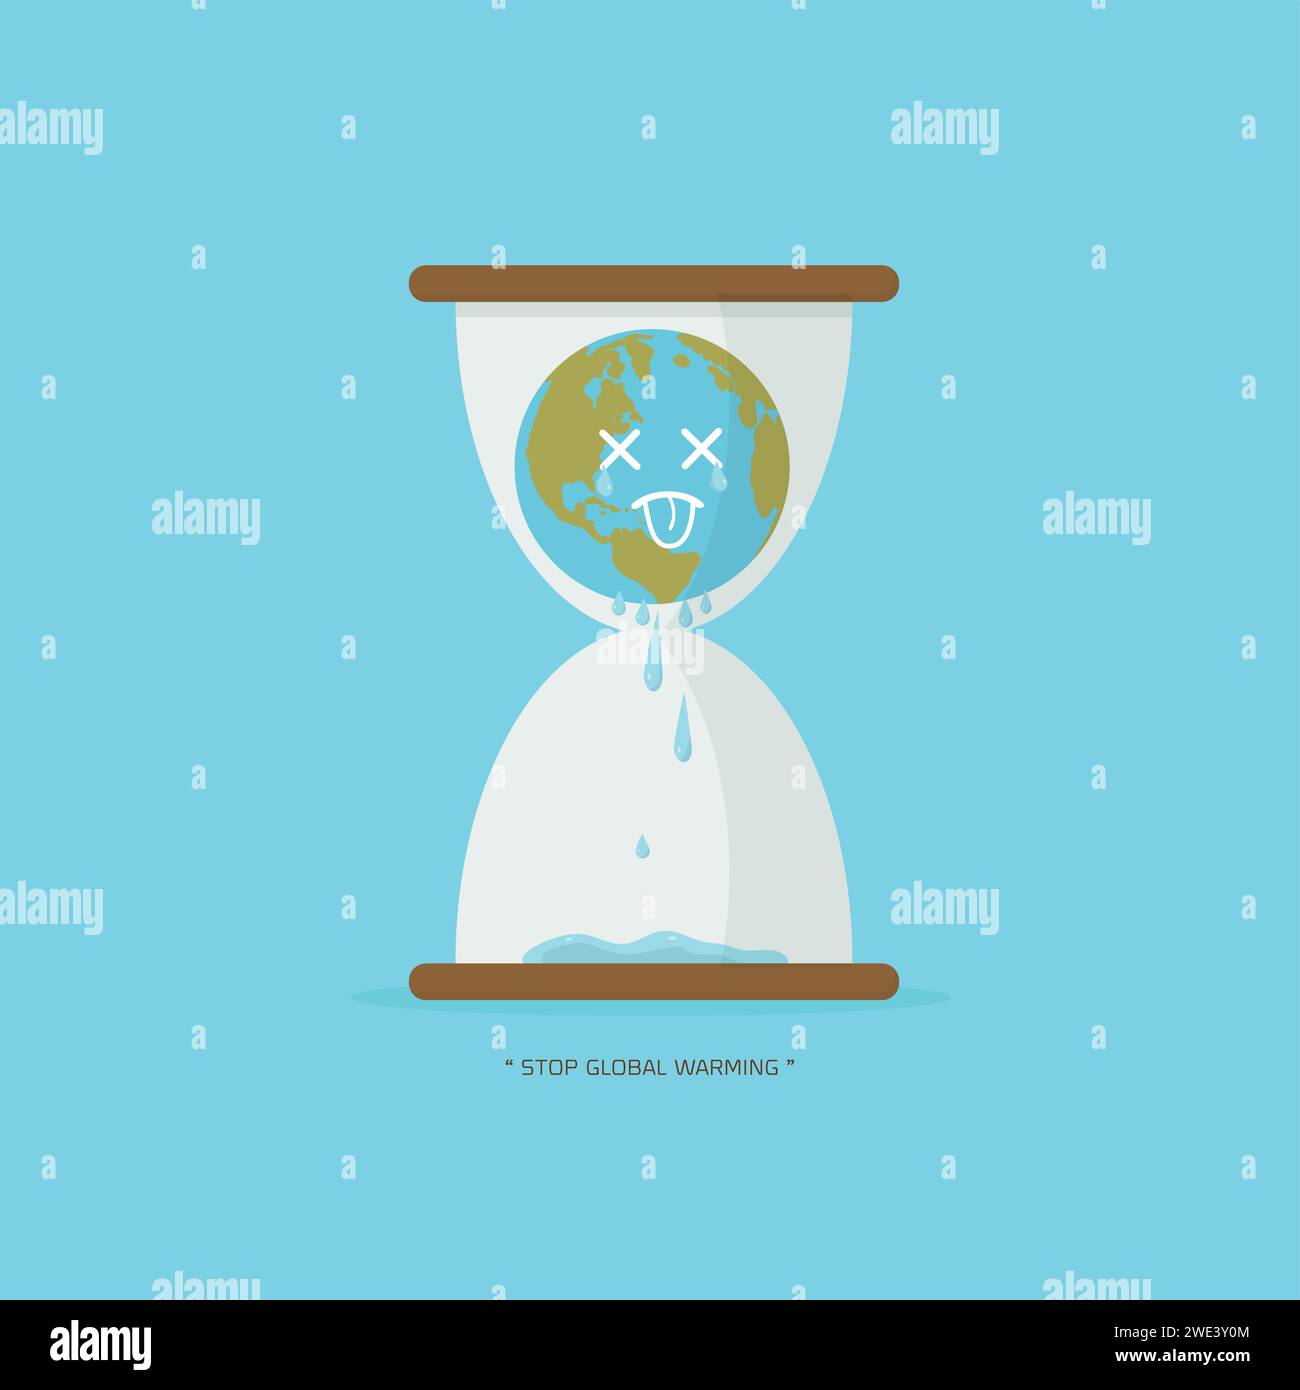 Stop global warming. cartoon character of Planet earth in hourglass limited time concept on blue background vector illustration. Stock Vector